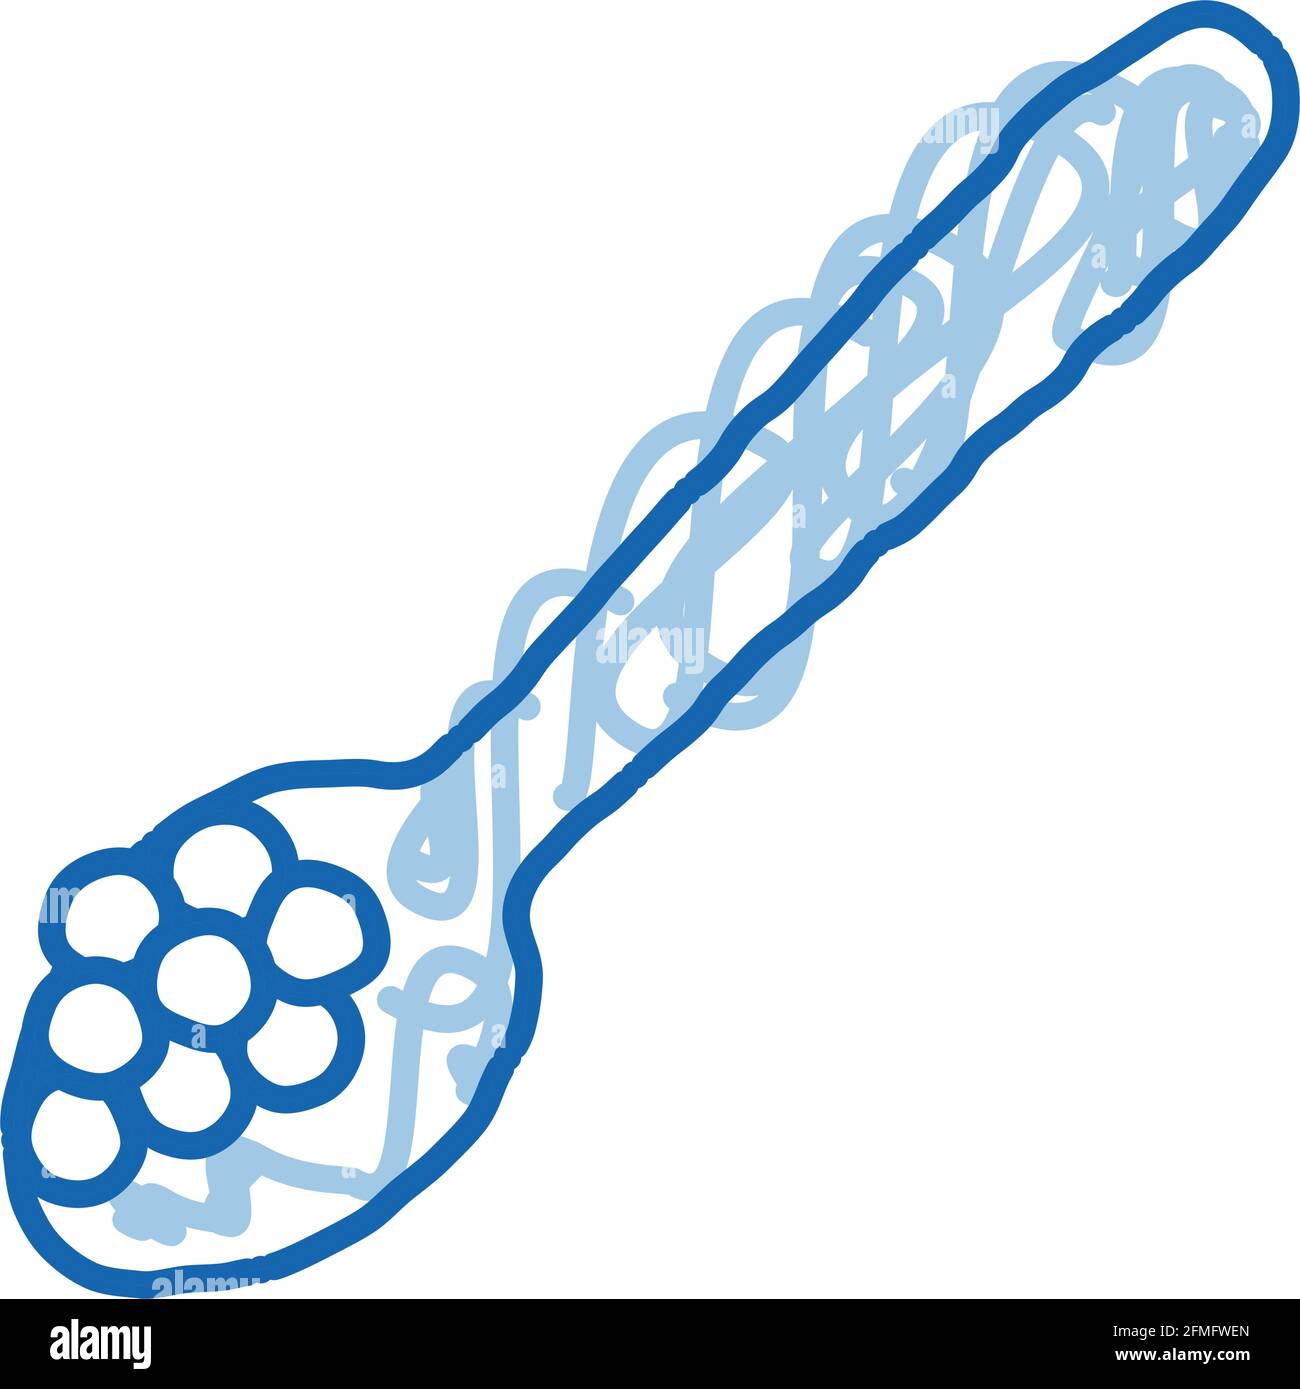 Caviar On Spoon doodle icon hand drawn illustration Stock Vector